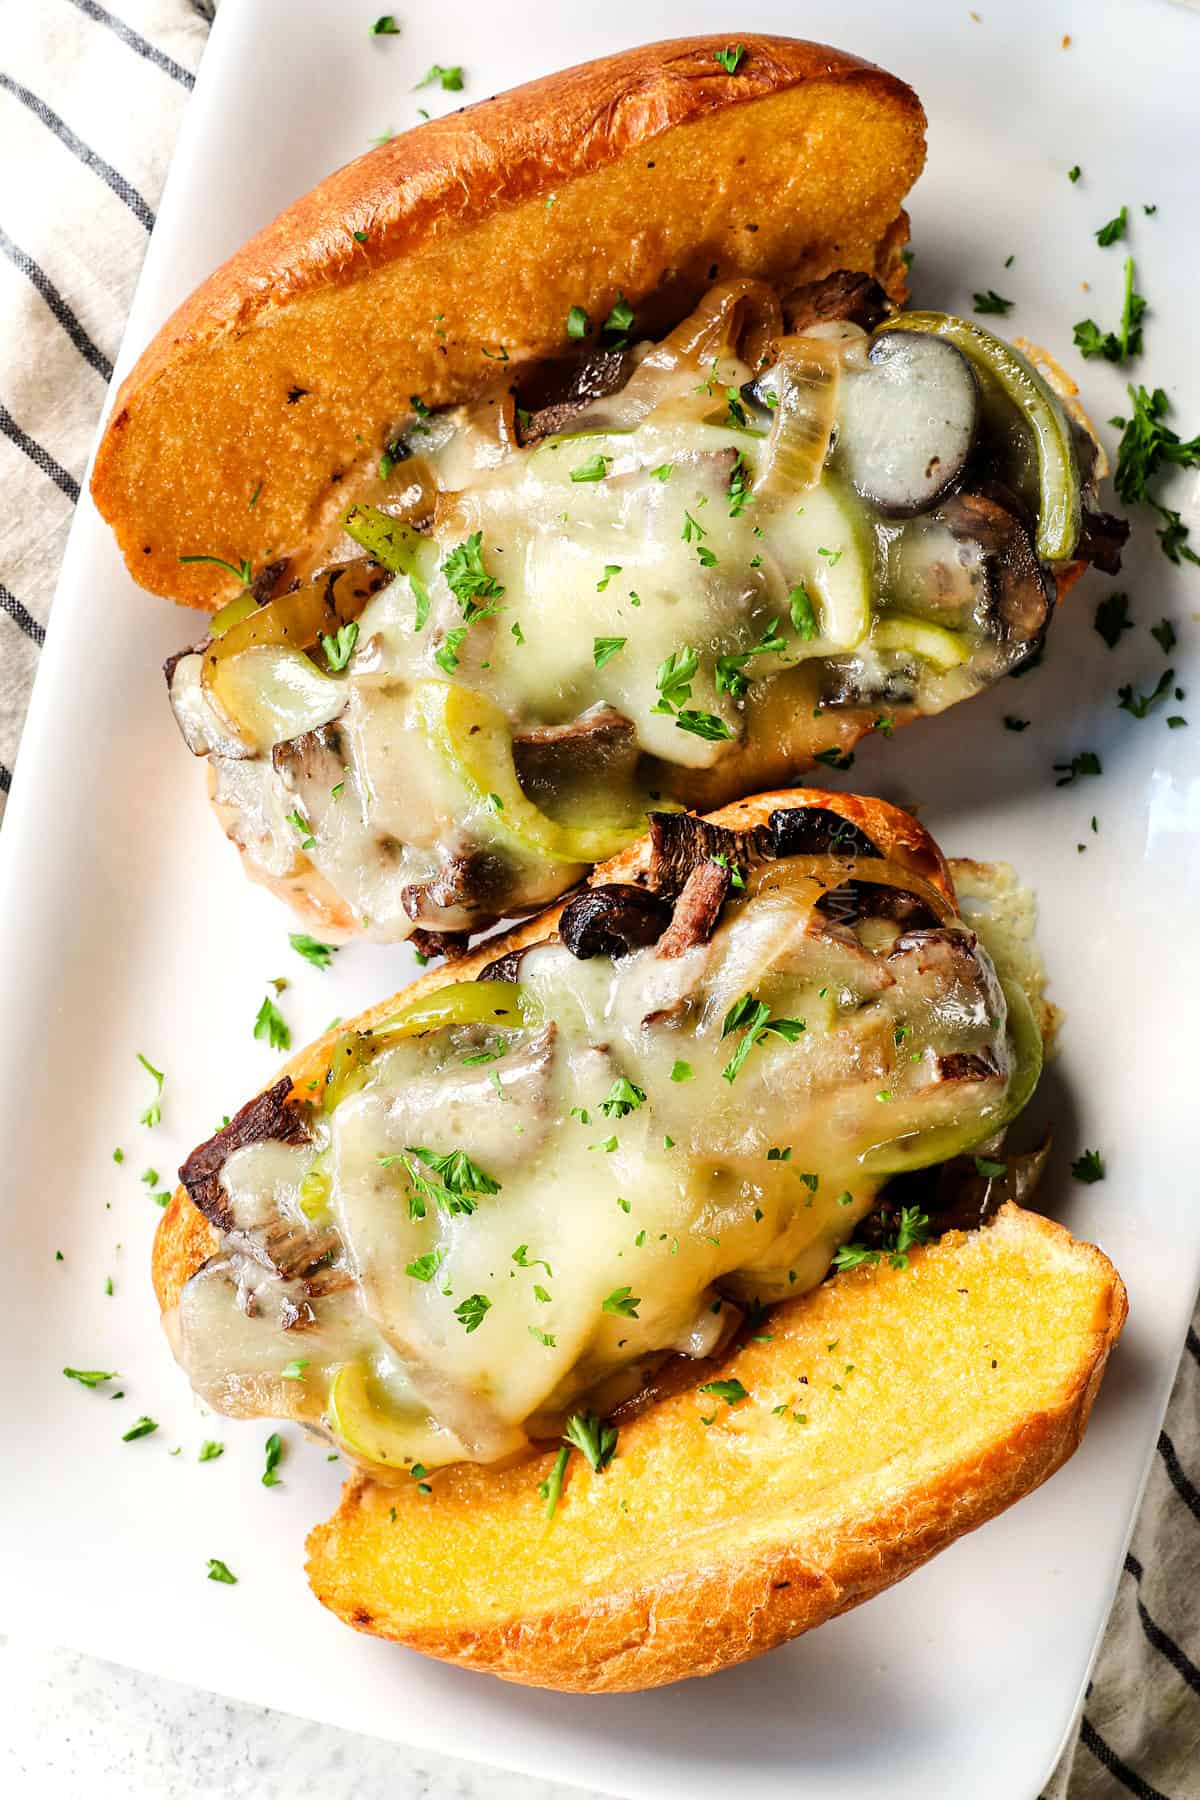 top view of authentic Crockpot Philly Cheesesteak recipe on hoagie rolls with provolone cheese